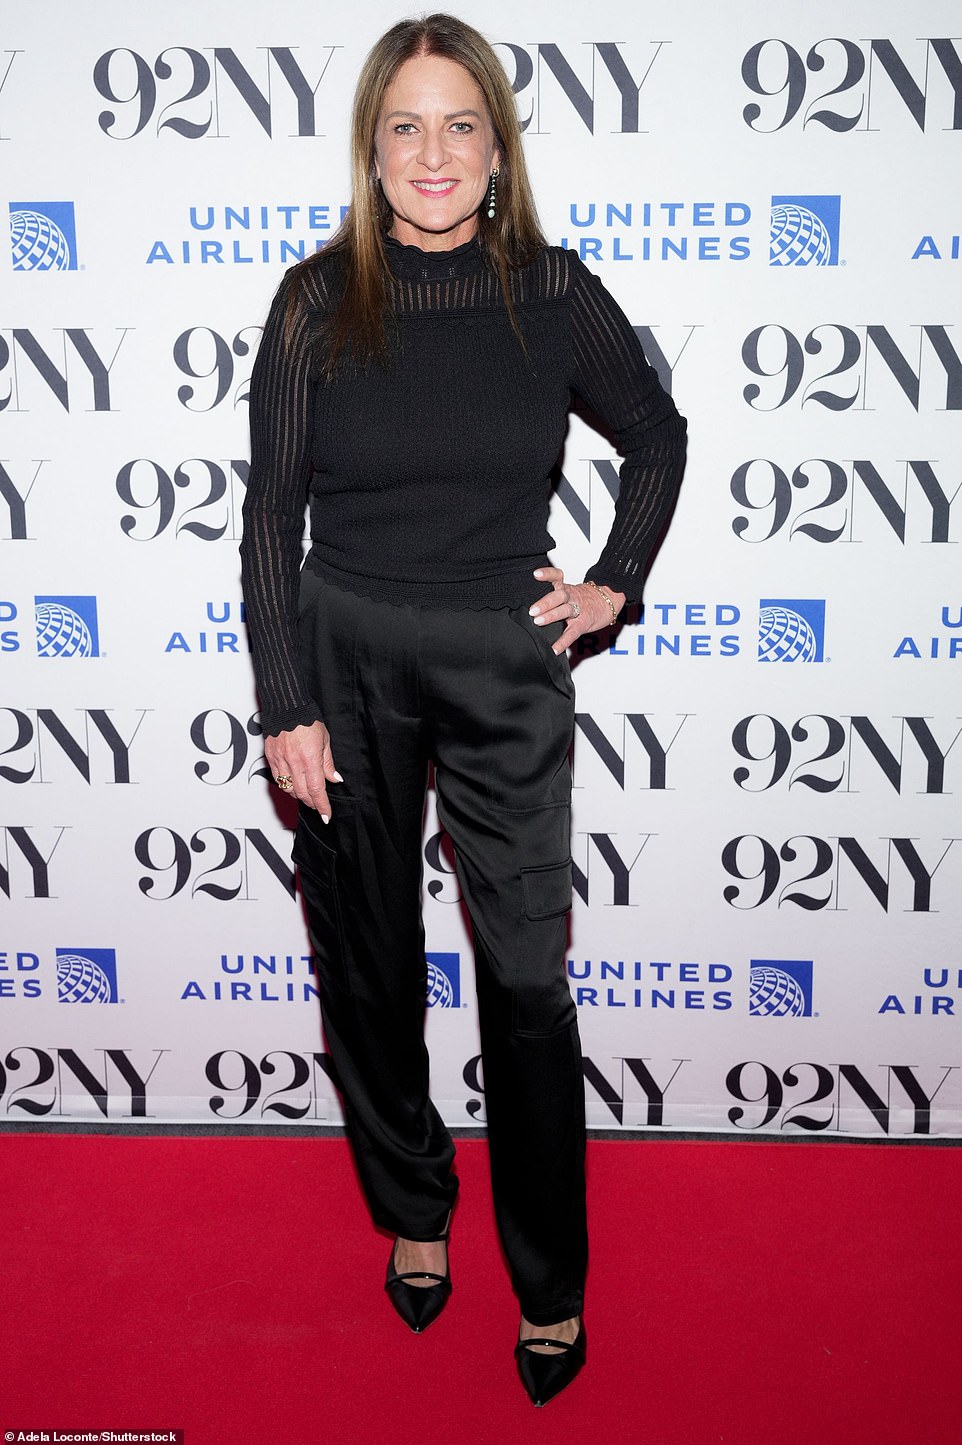 Producer Cathy Schulman went for an all-black look that included a sheer ribbed sweater and pants with a shiny finish.